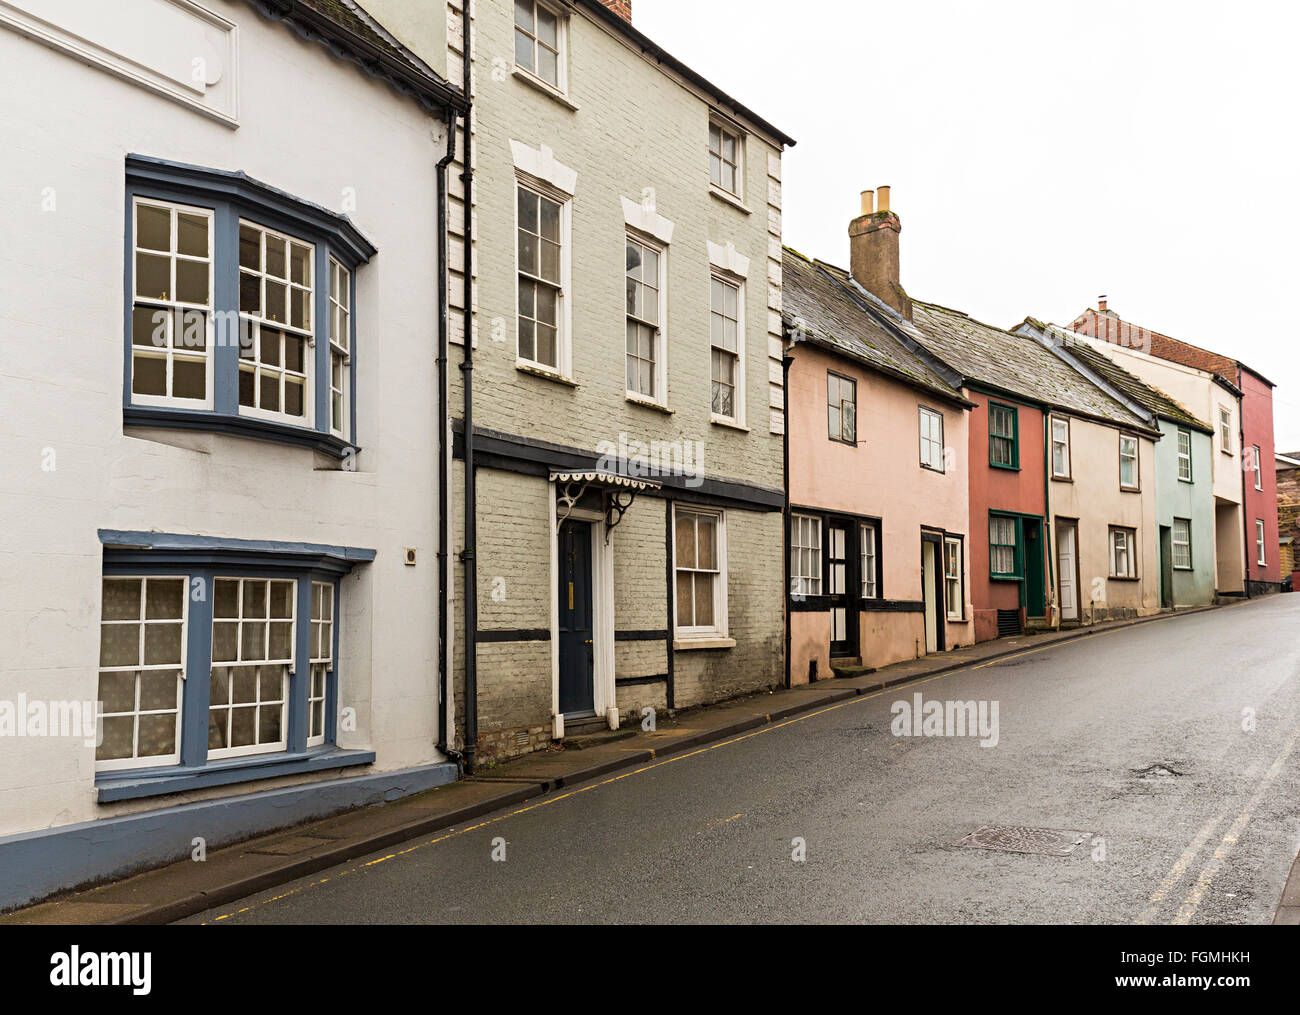 Vieille rue de maisons mitoyennes, Ross on Wye, Herefordshire, Engtand, UK Banque D'Images